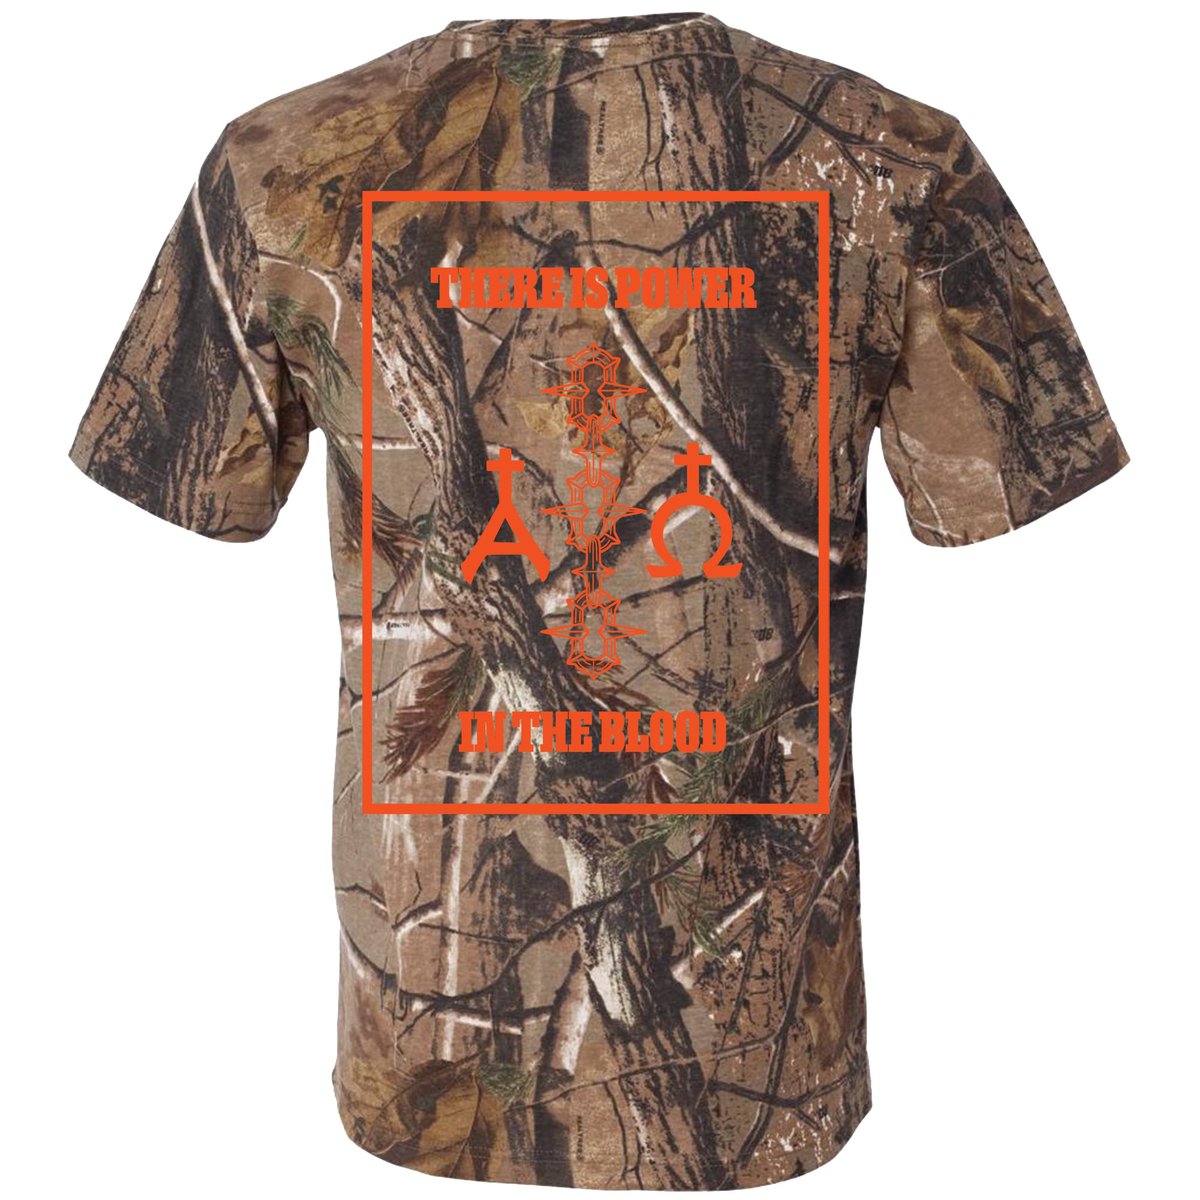 Spring cleaning merch drop at the @flameperpetual store! New POWER IN THE BLOOD authentic realtree shirt and hat along with older Lingy designs and IDUMEA tour long sleeve! Snag now dear buds. perpetualflamestore.com